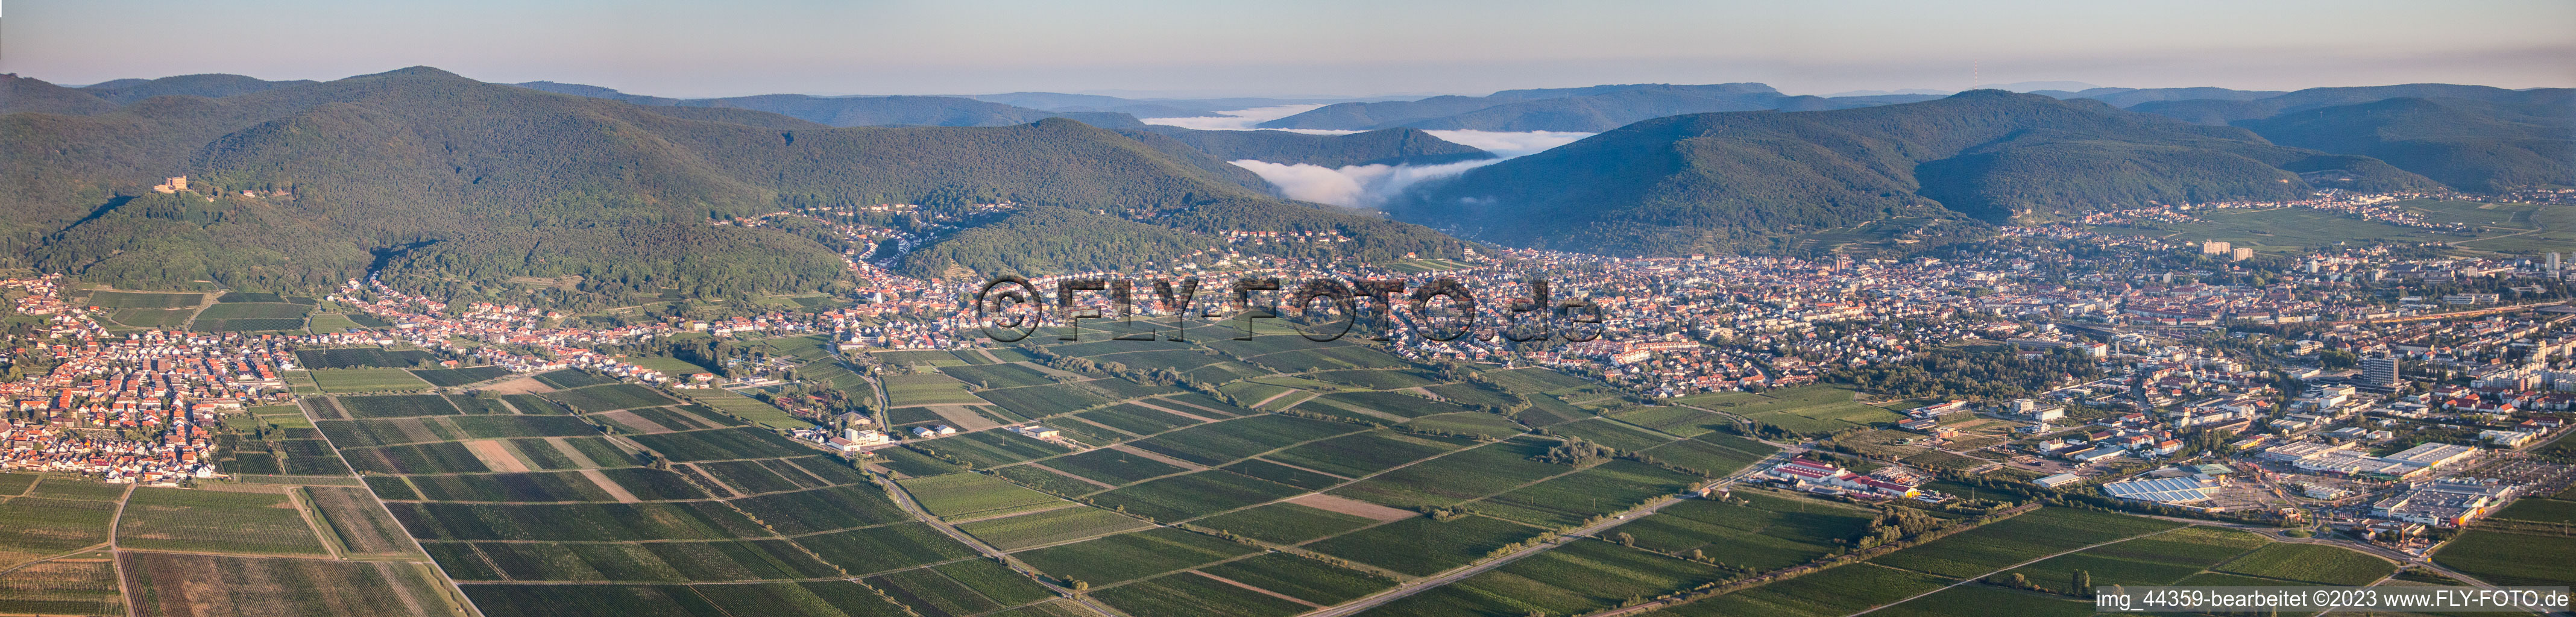 Morning Panorama from the local area and environment in Neustadt an der Weinstrasse in the state Rhineland-Palatinate